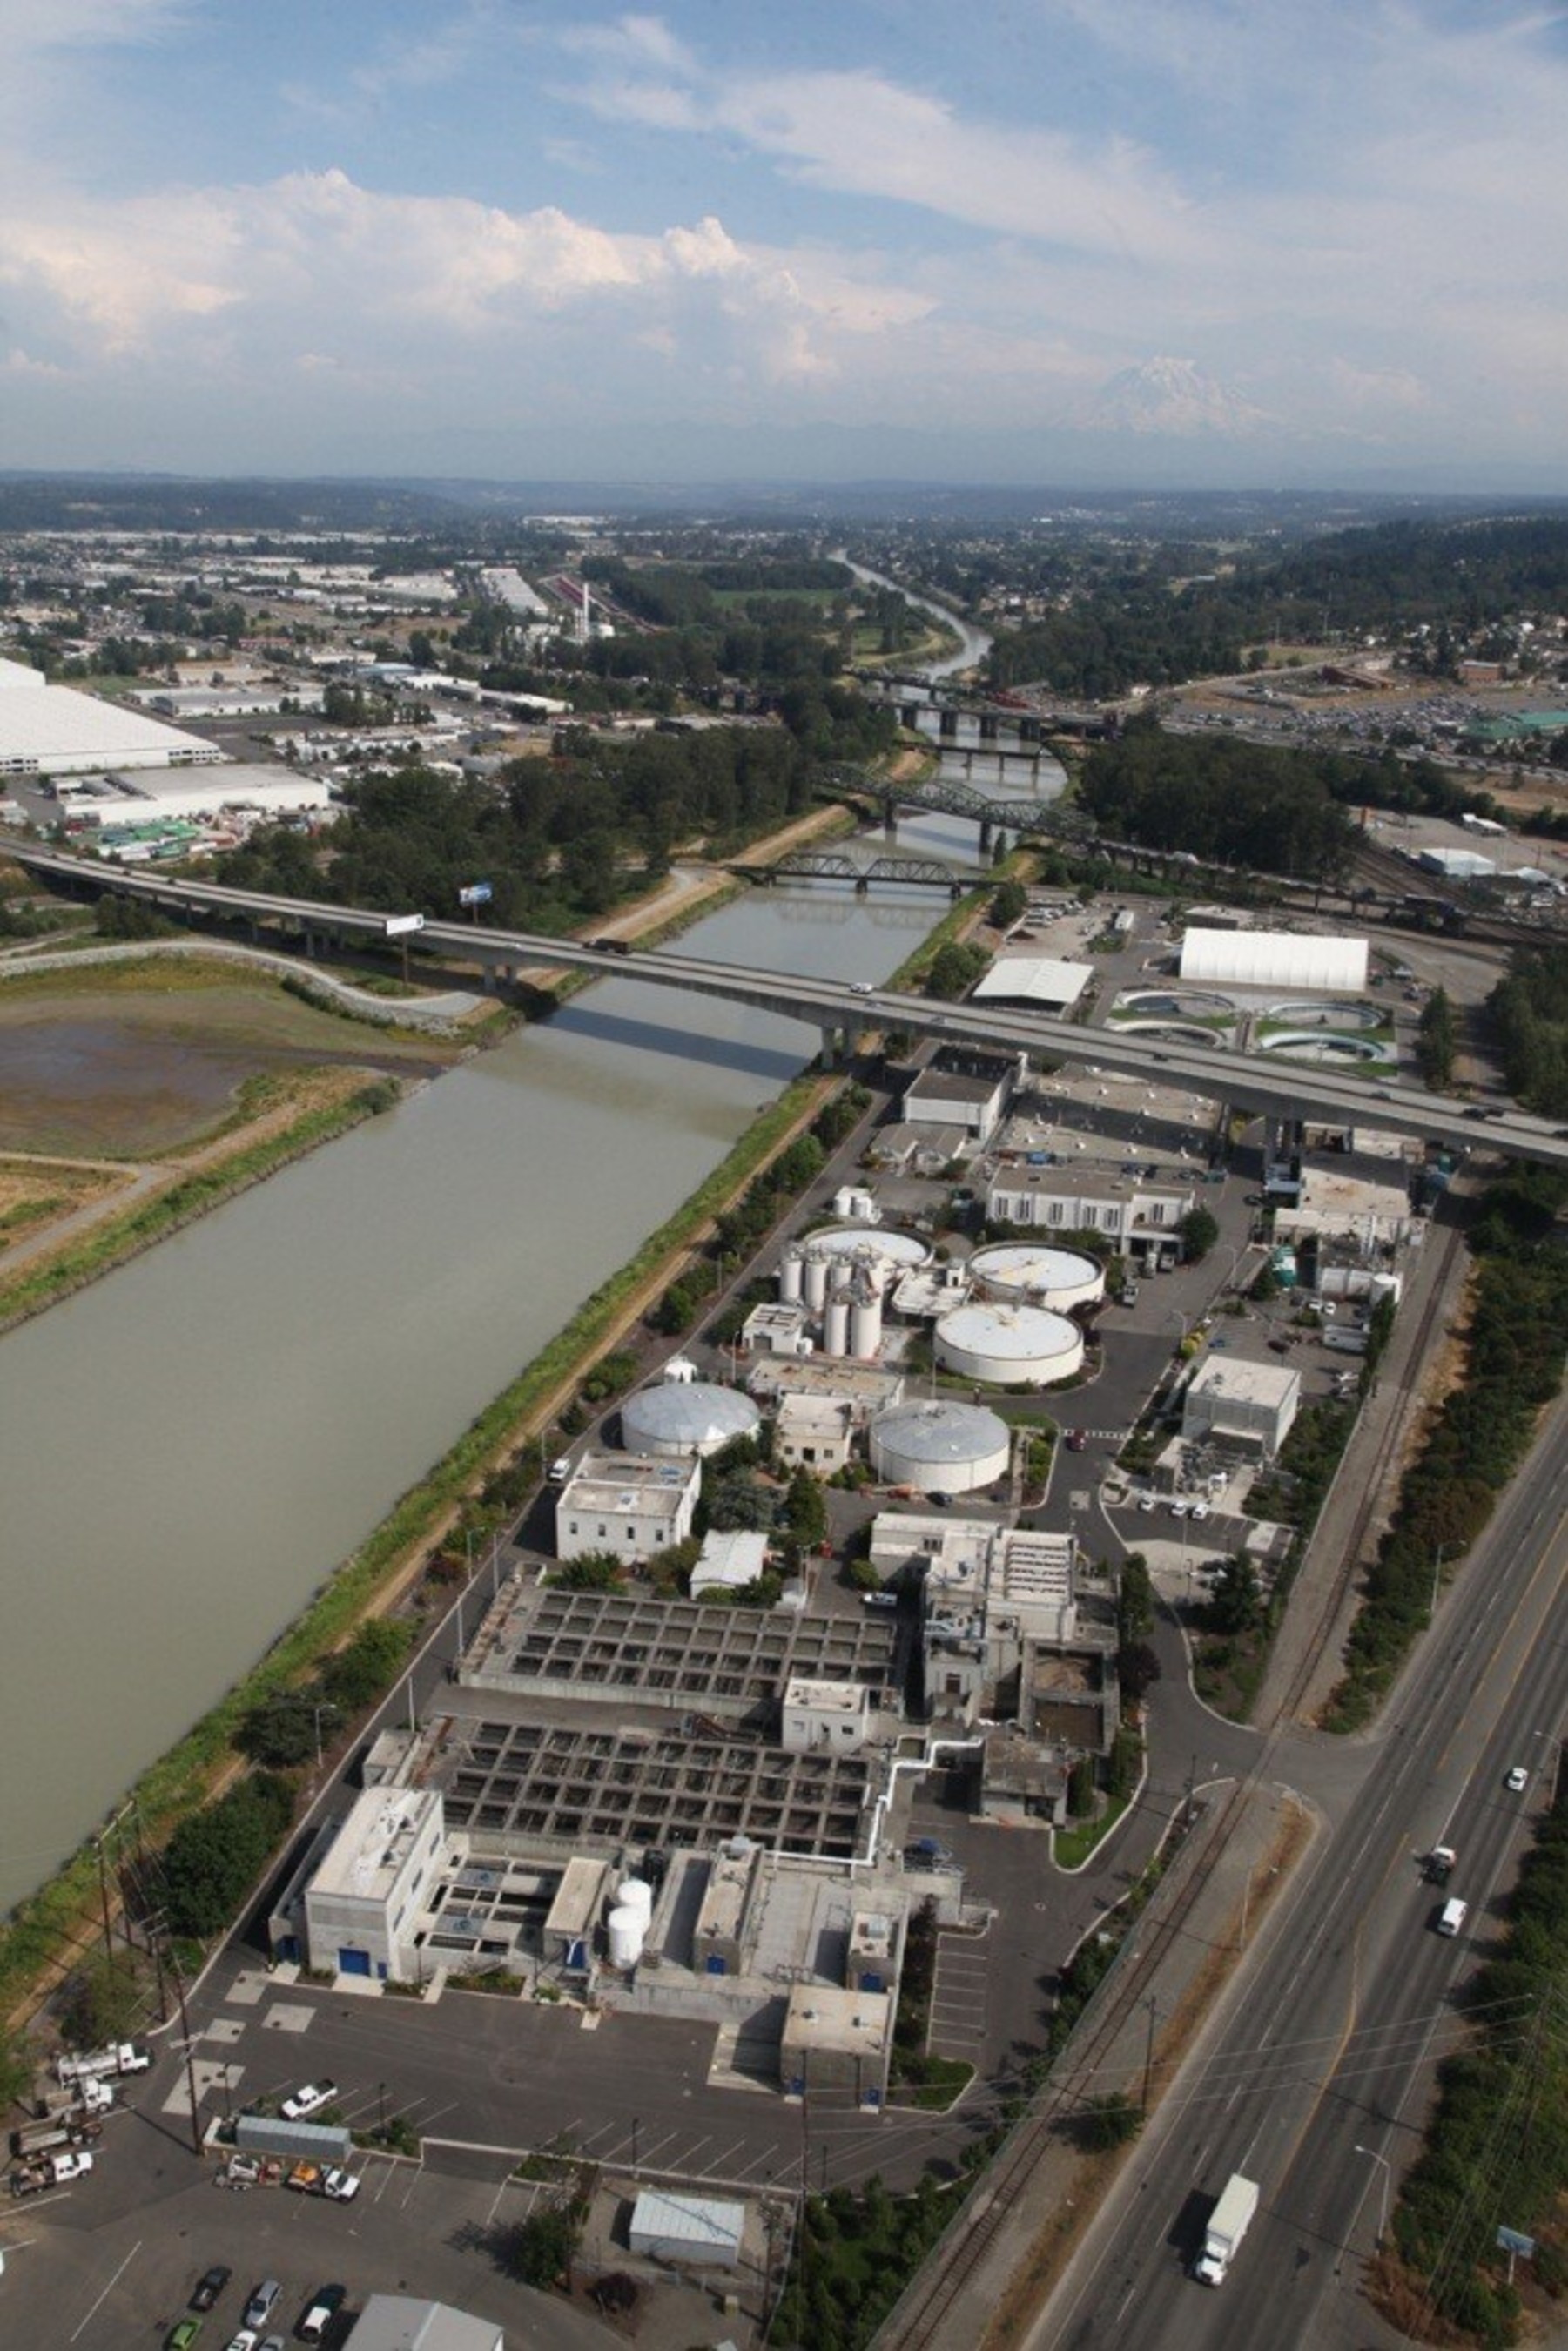 Serving as Primary Consultant for the Tacoma Central Wastewater Treatment Plant Flood Protection Project, the CH2M design team helped bring the project to fruition within budget and two months ahead of schedule.